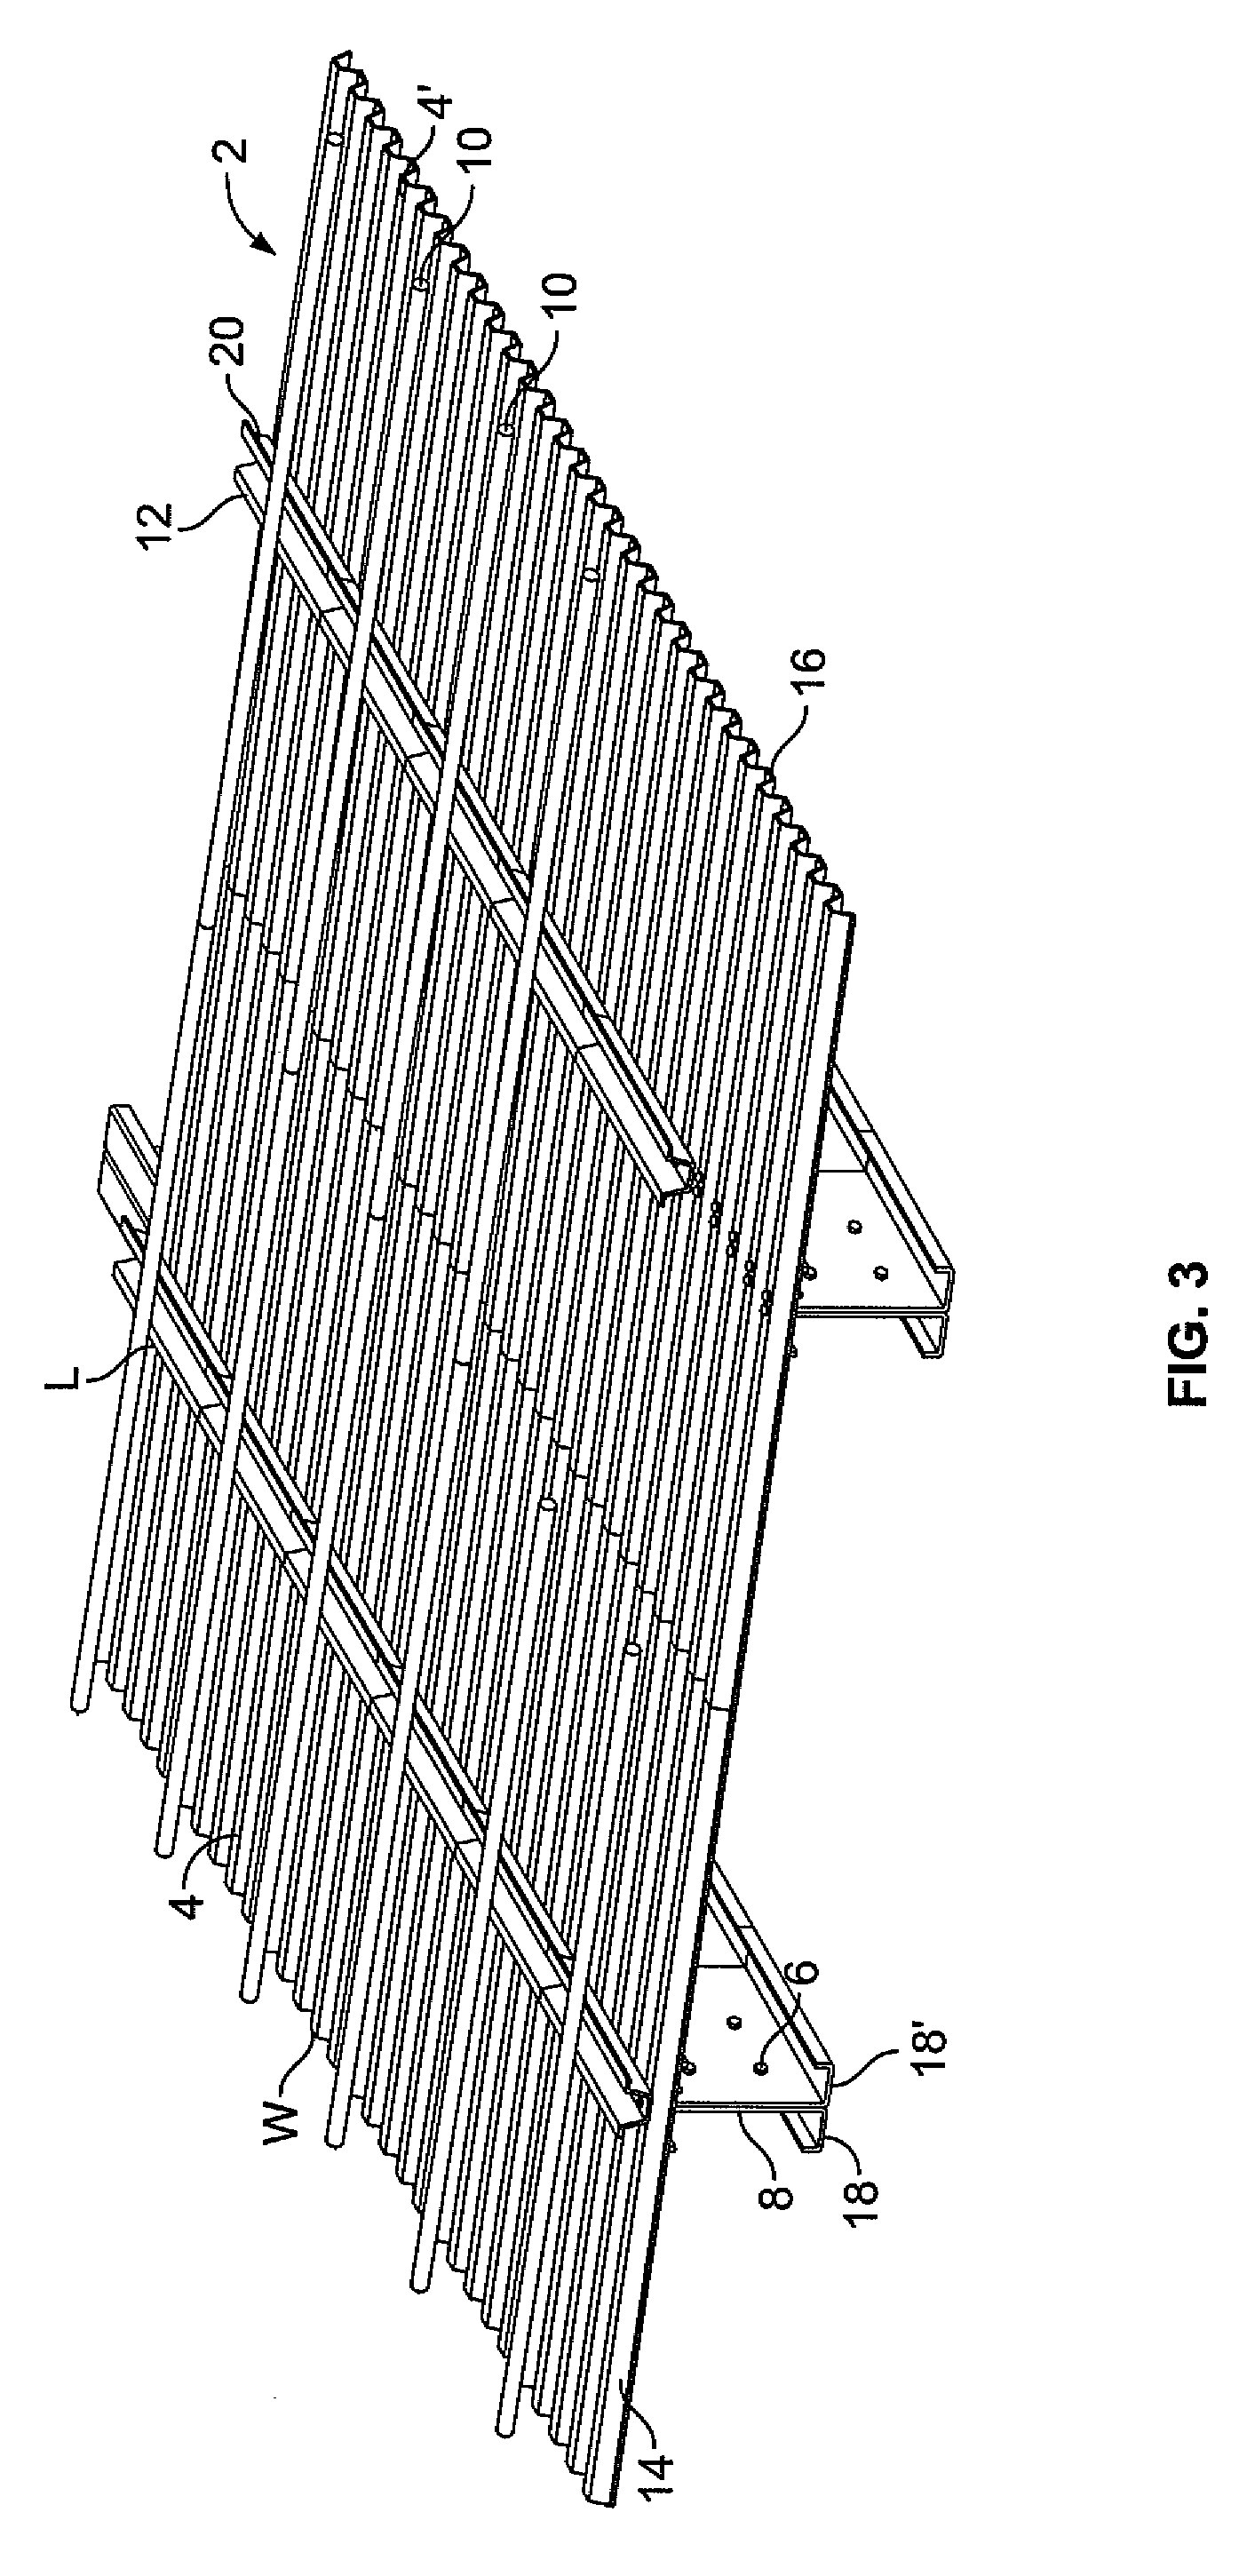 System and method of use for composite floor